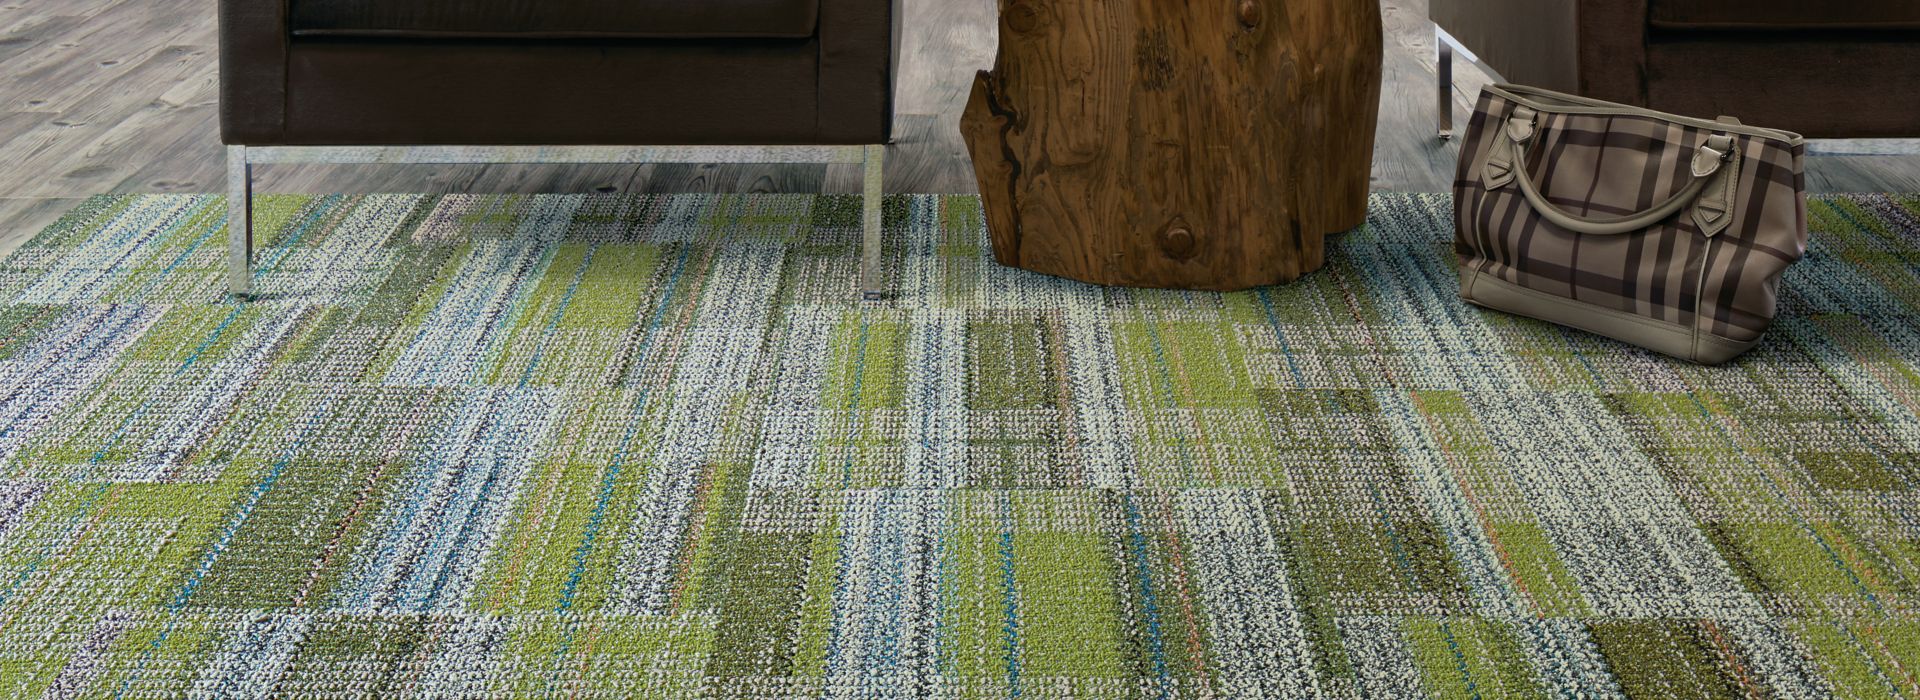 Interface Summerhouse Brights carpet tile and Natural Woodgrains LVT in seating area with black chairs imagen número 2